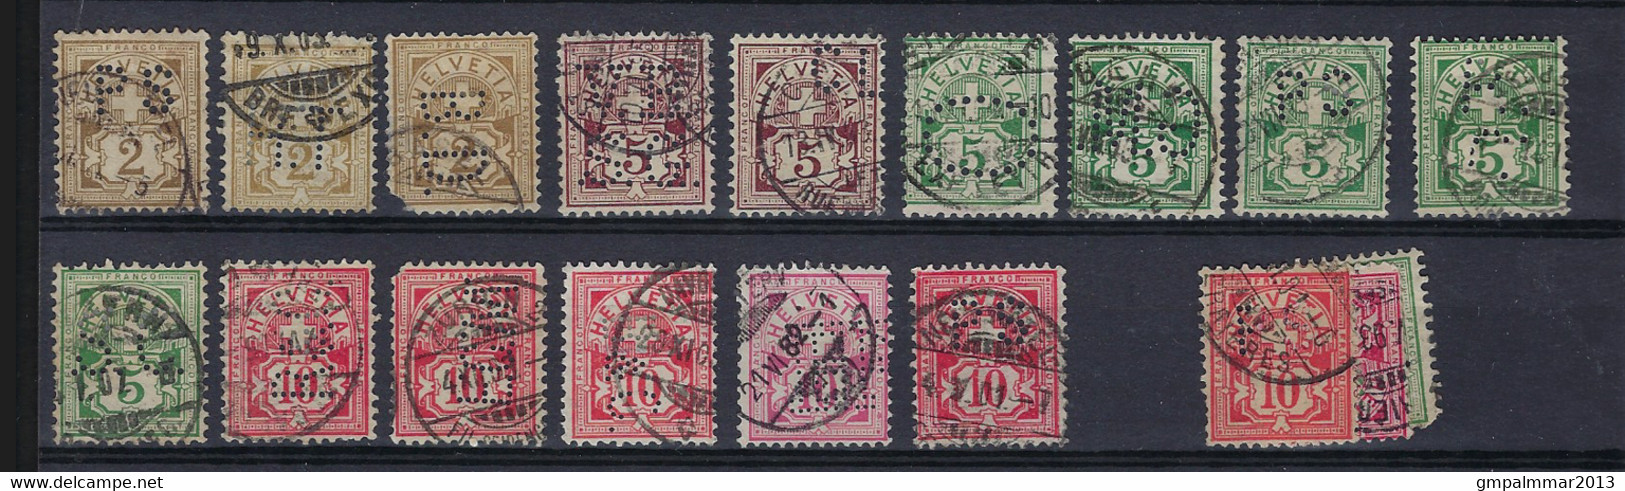 PERFIN / PERFO Suisse  /  Switzerland  1883   15  Stamps All Different Combinations ; Details See 2 Scans ! LOT 105 - Perforés